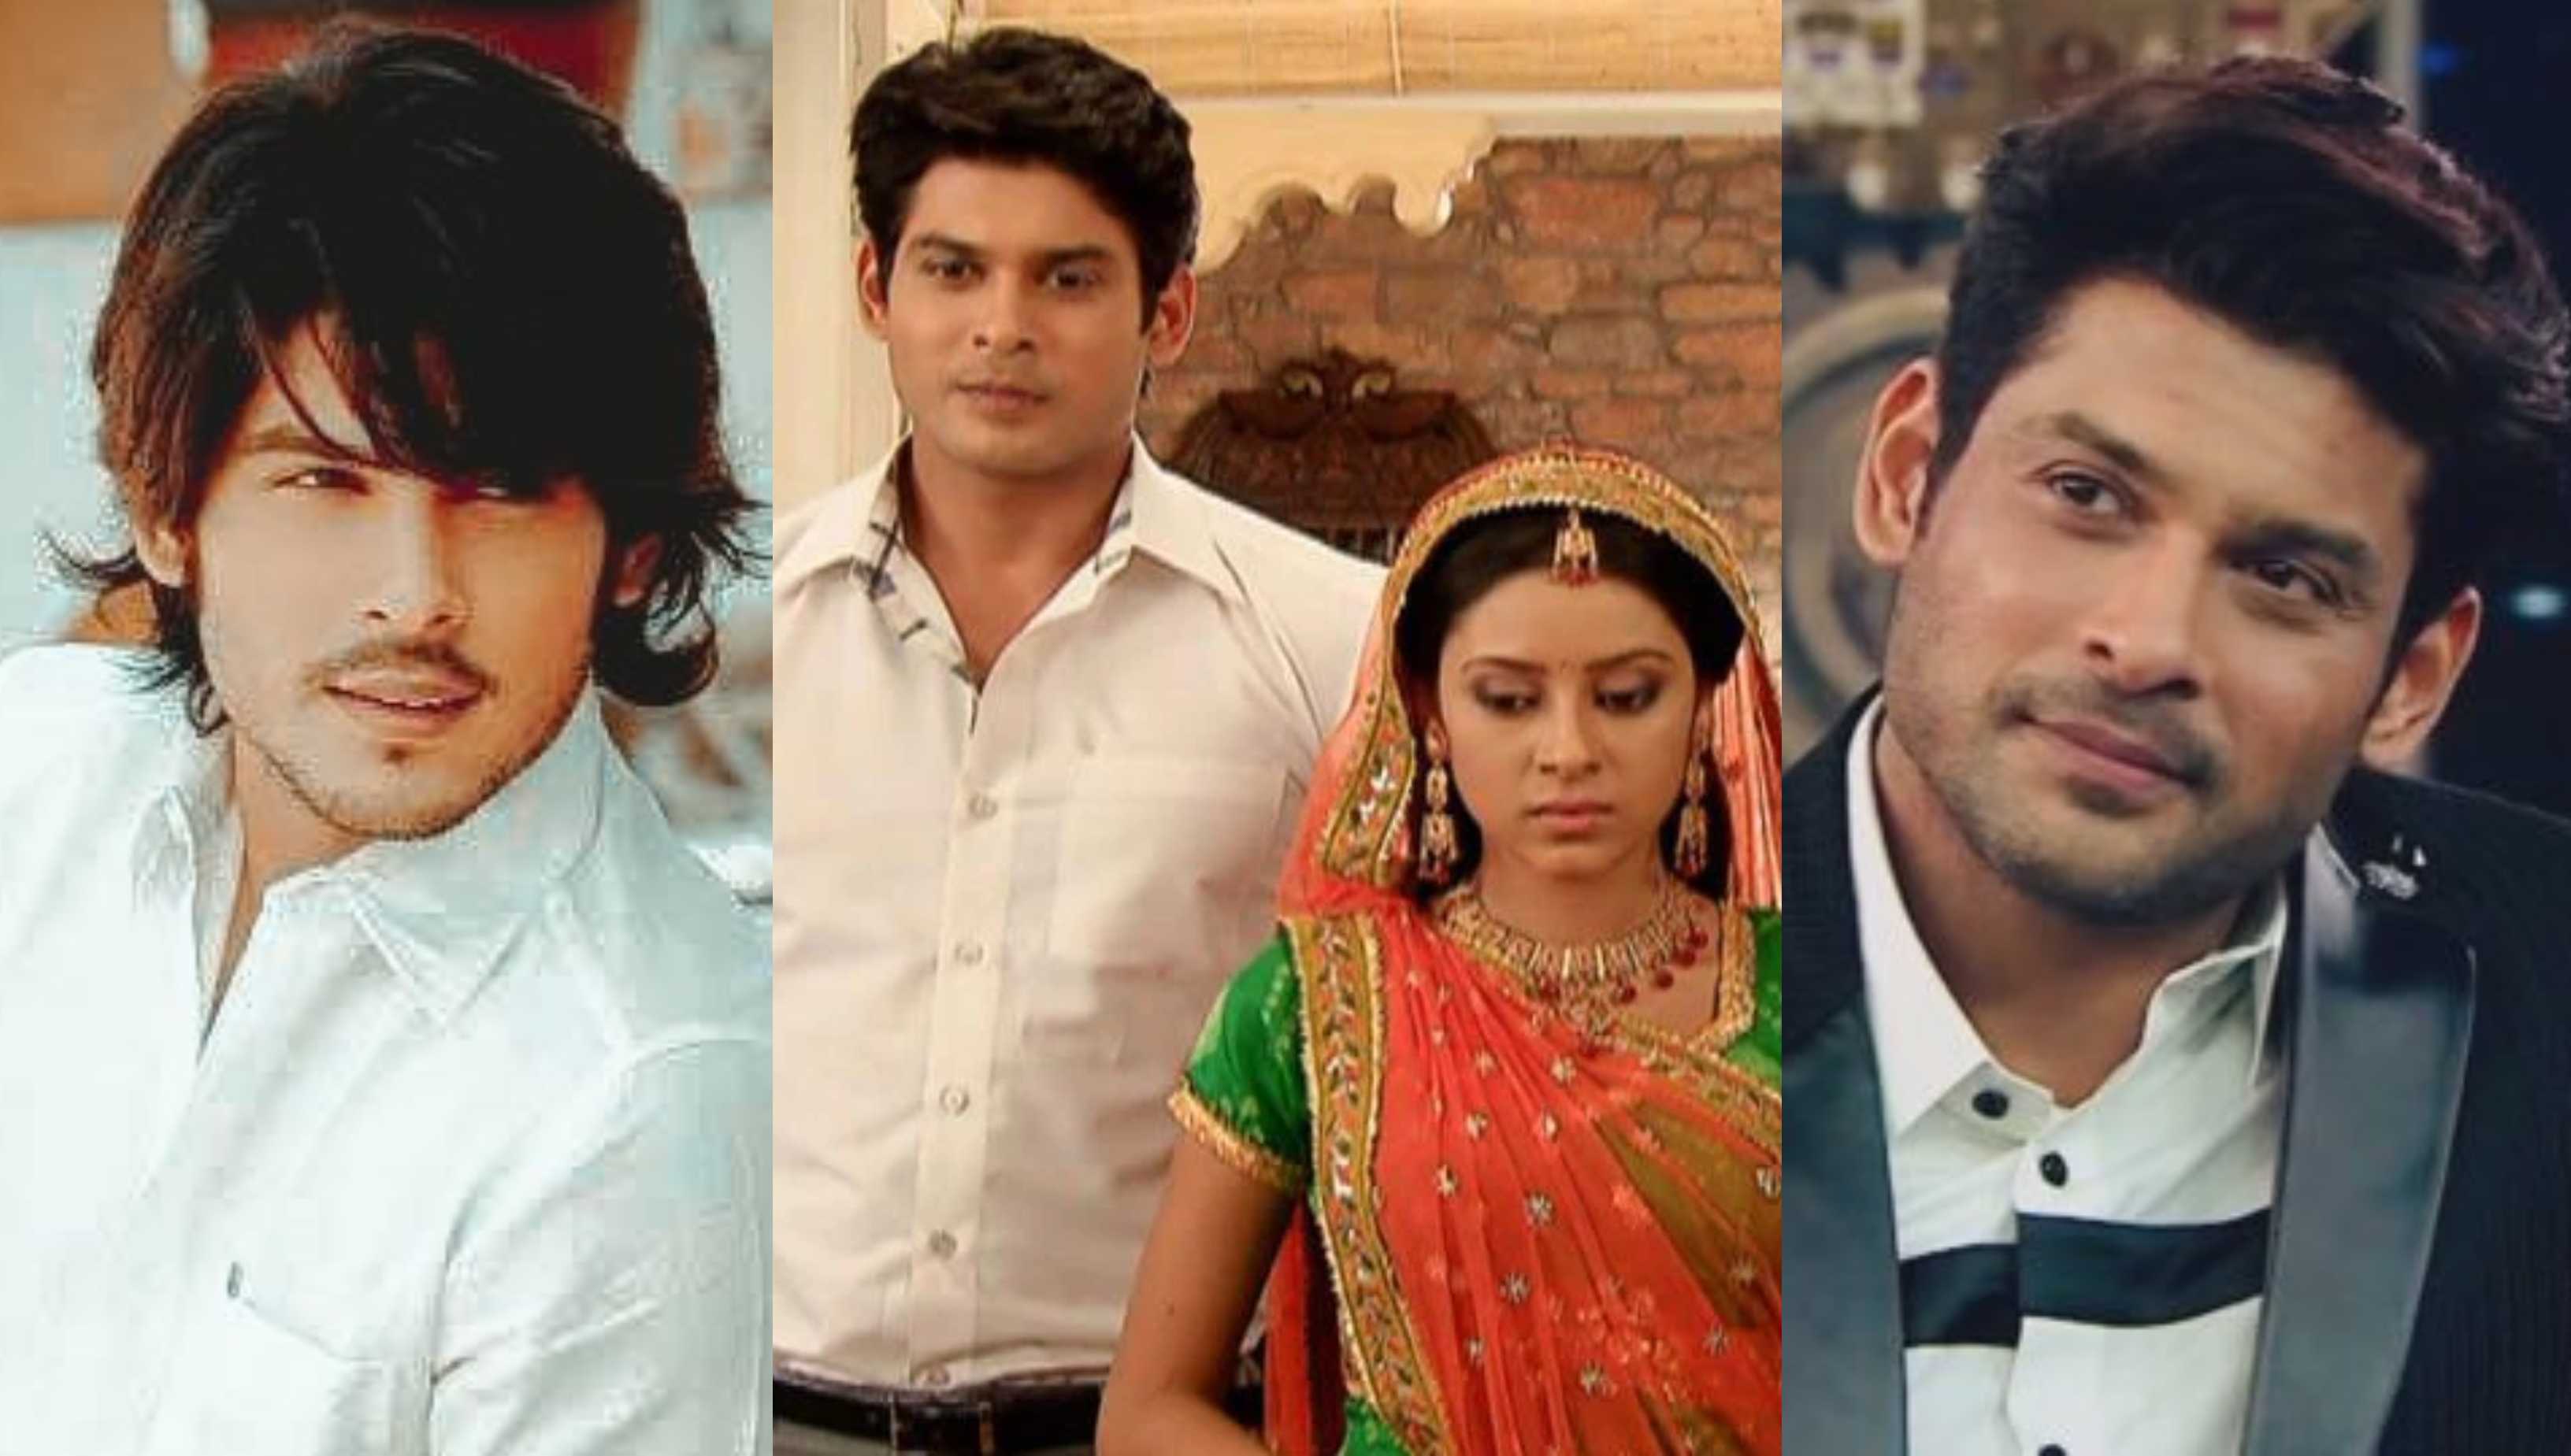 Remembering Sidharth Shukla: A look back at his incredible journey, from an interior designer to TV’s beloved superstar